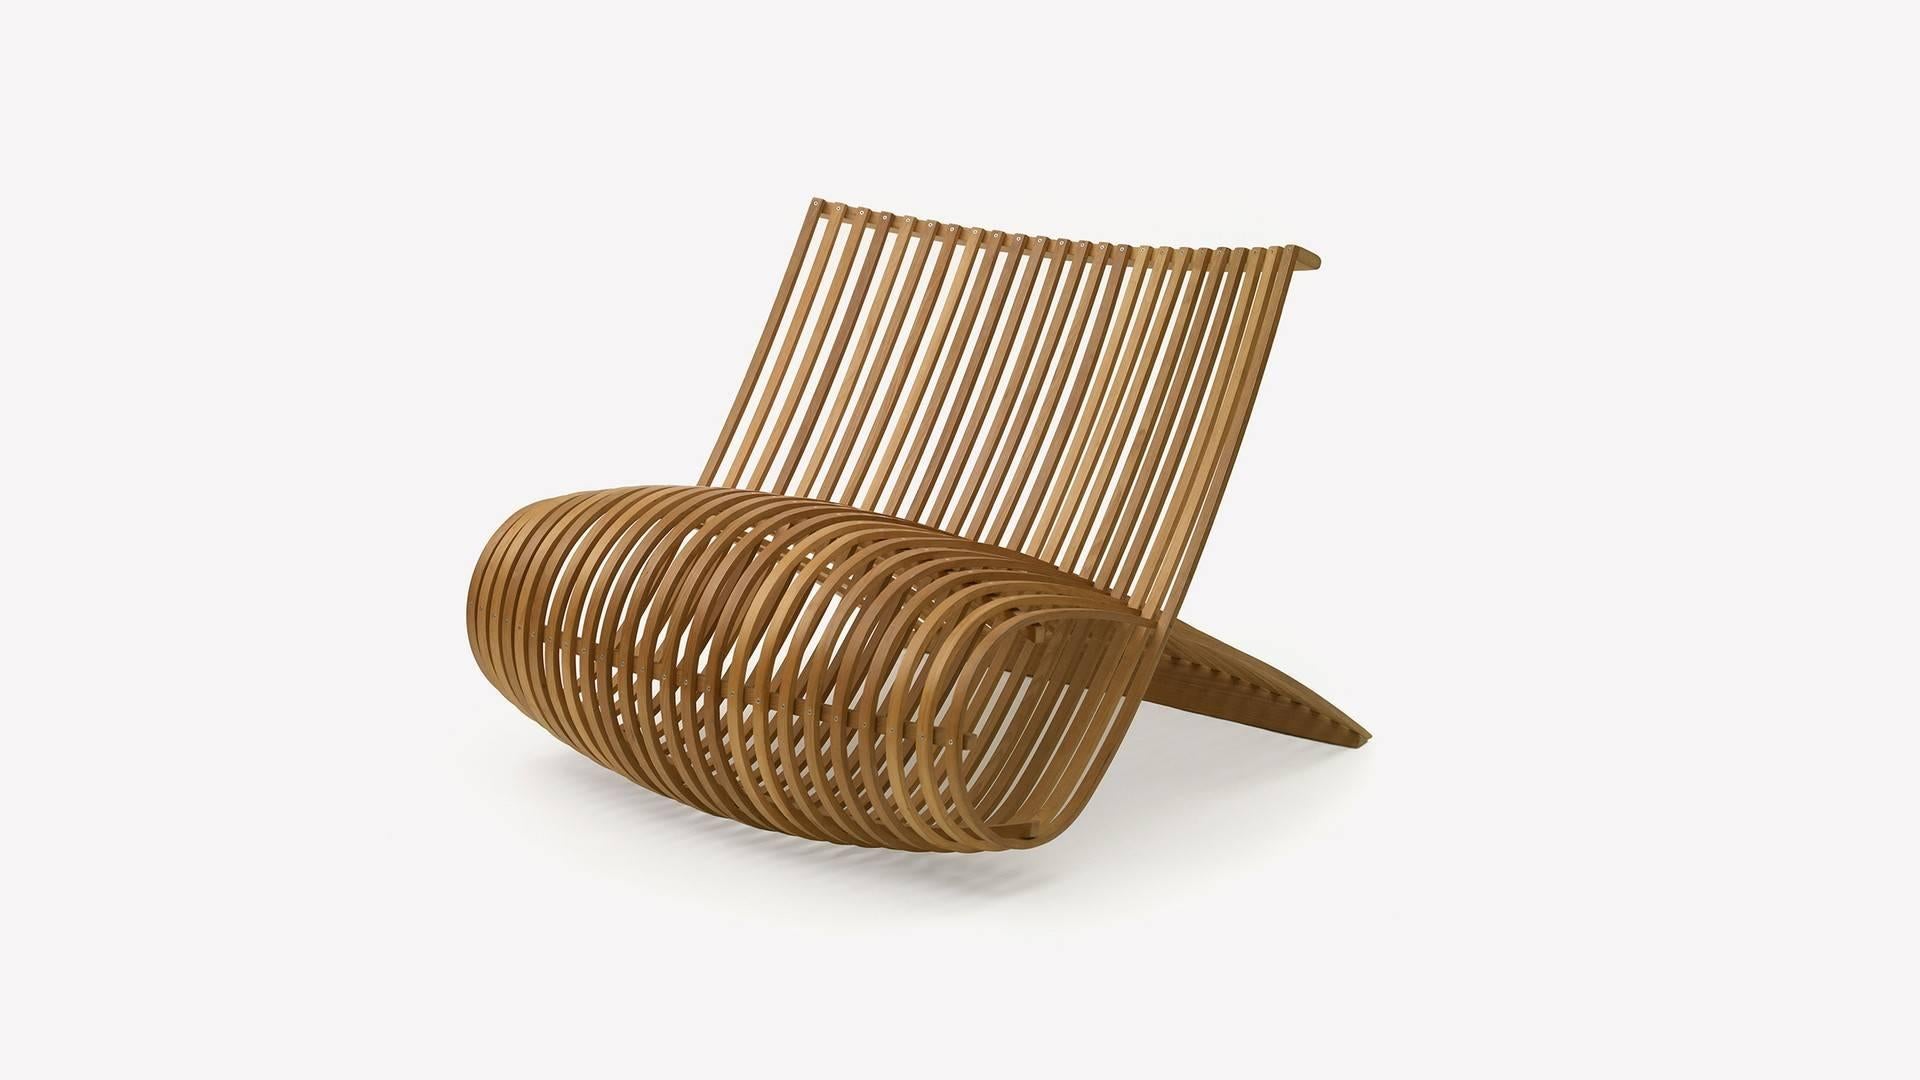 The Wooden Chair was designed in 1992 by Marc Newson for Cappellini. The chair is constructed of strips of bent natural beech hardwood with exposed fasteners. Due to its construction, the armchair has flexibility to allow for sitting comfort.